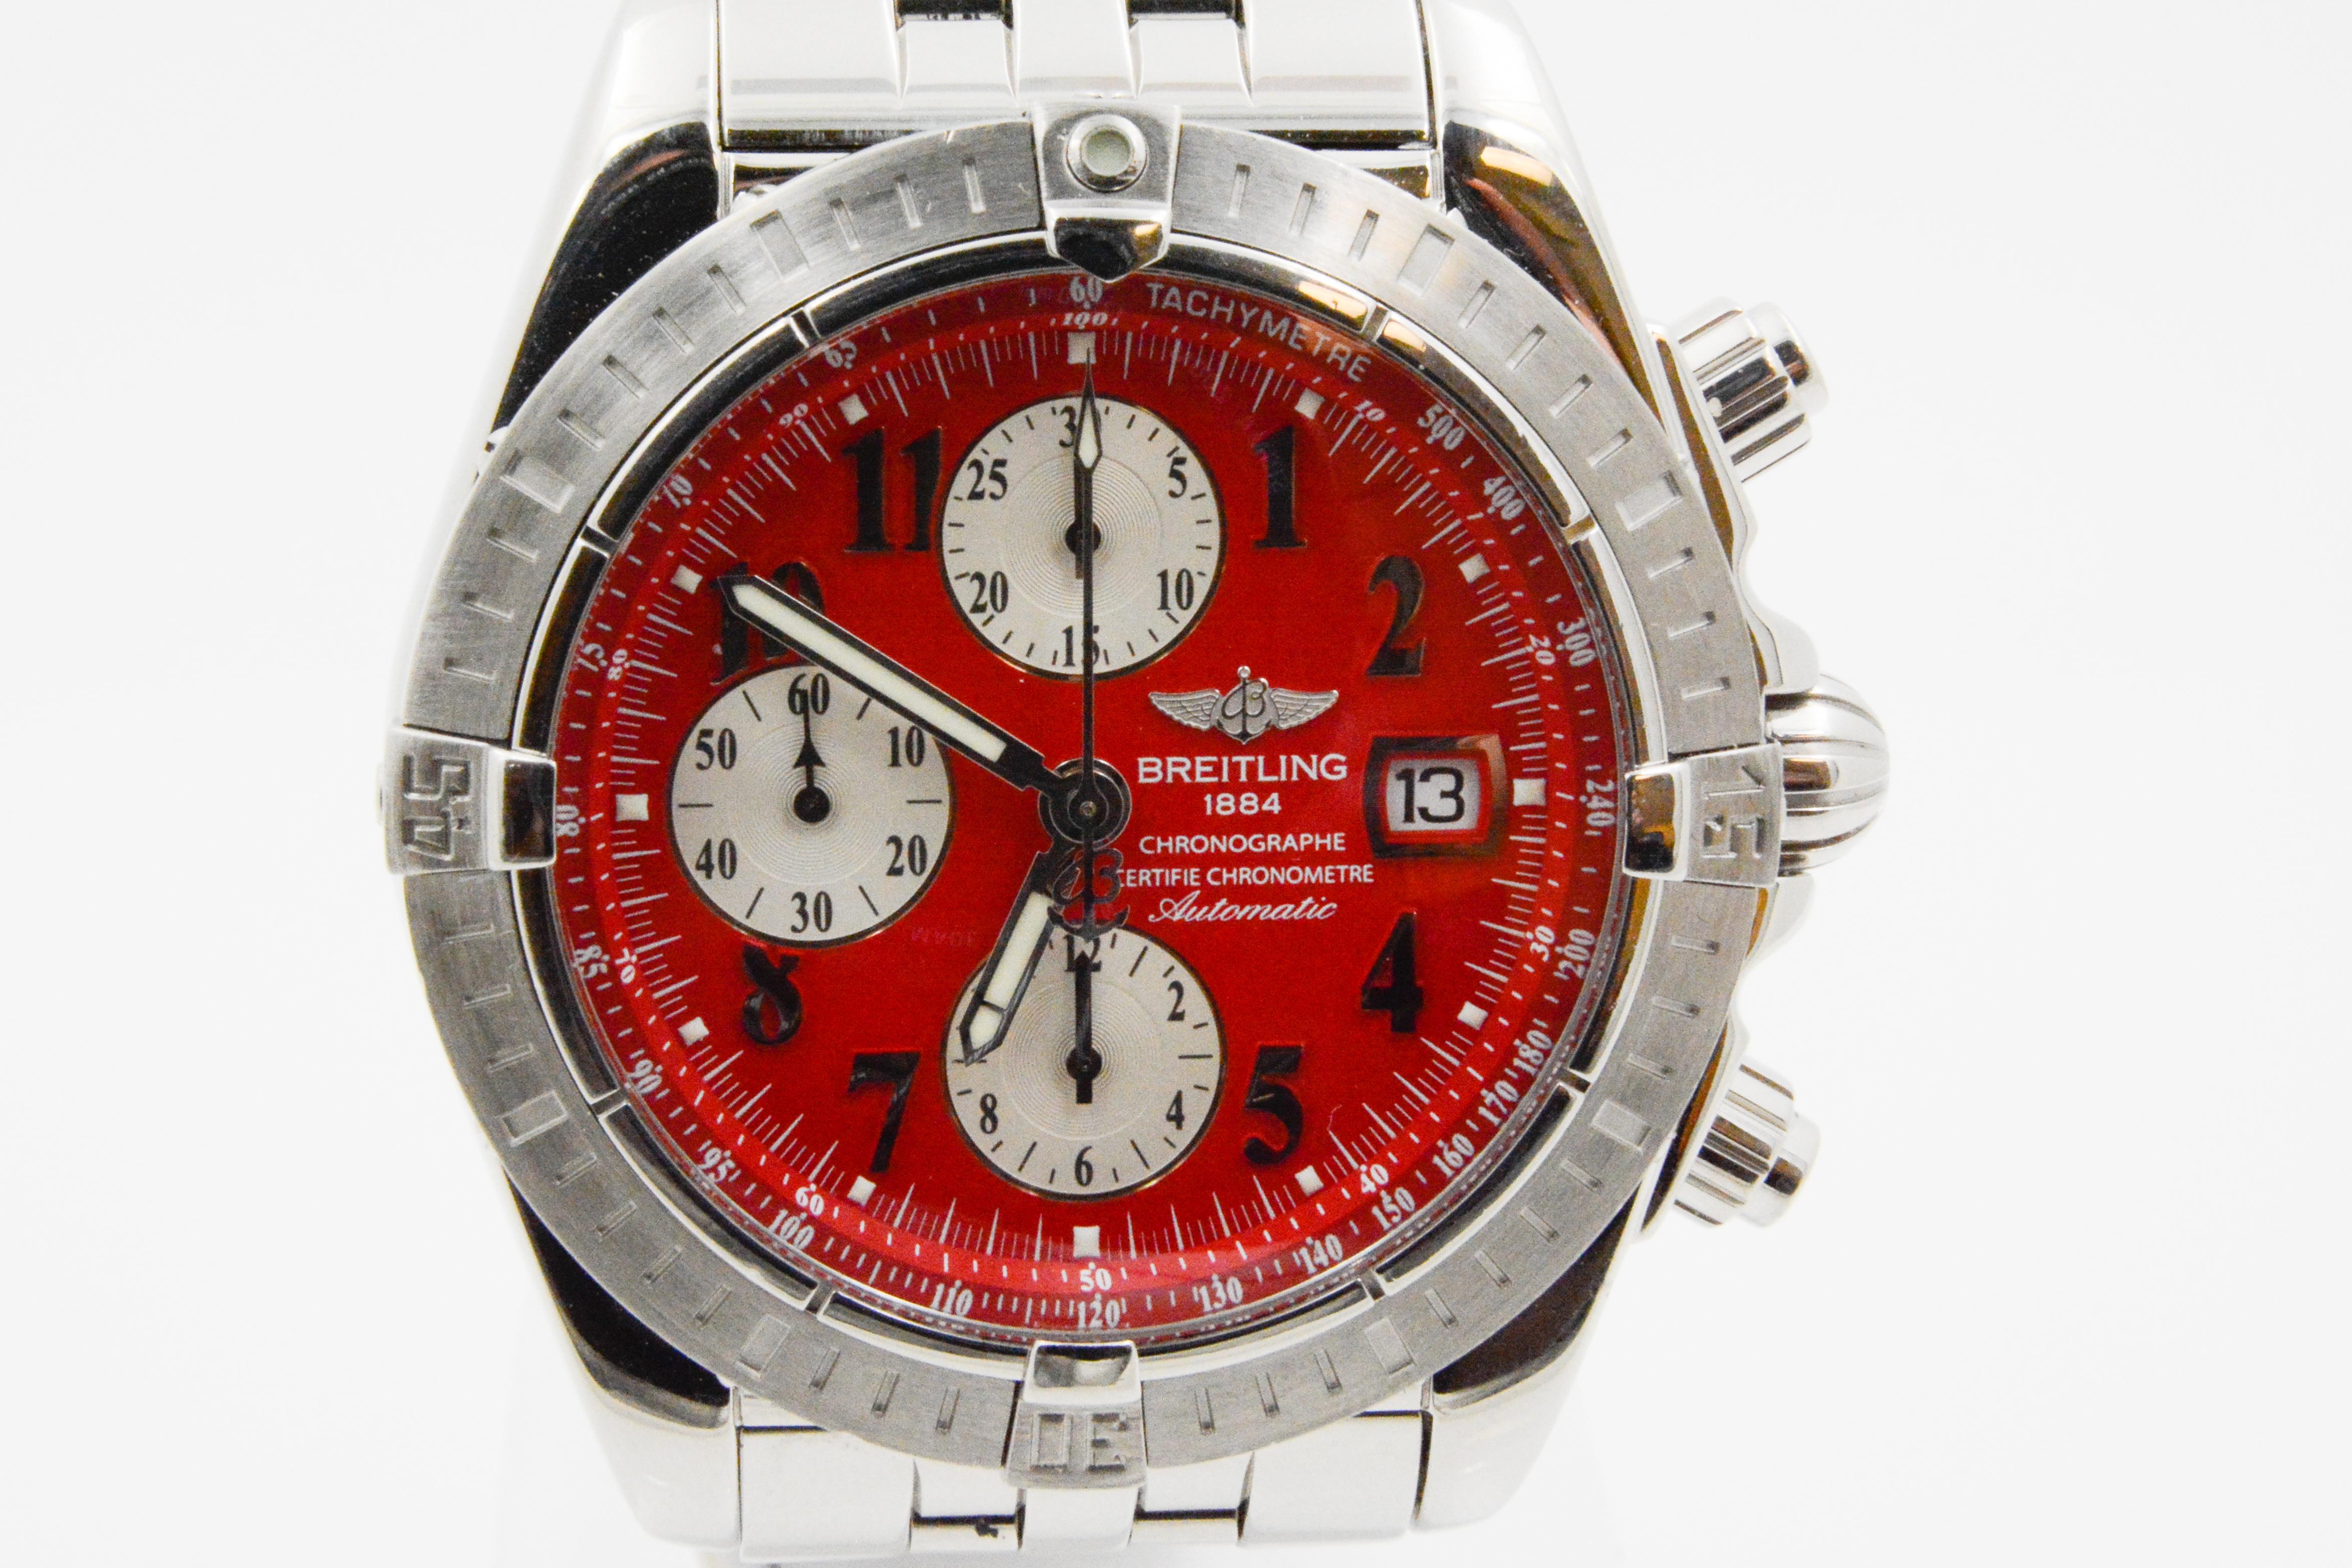 This CPO Breitling Chronomat Evolution steel time piece has automatic movement with a red Arabic dial with silver subs and sapphire crystal. It has a polished steel bracelet.